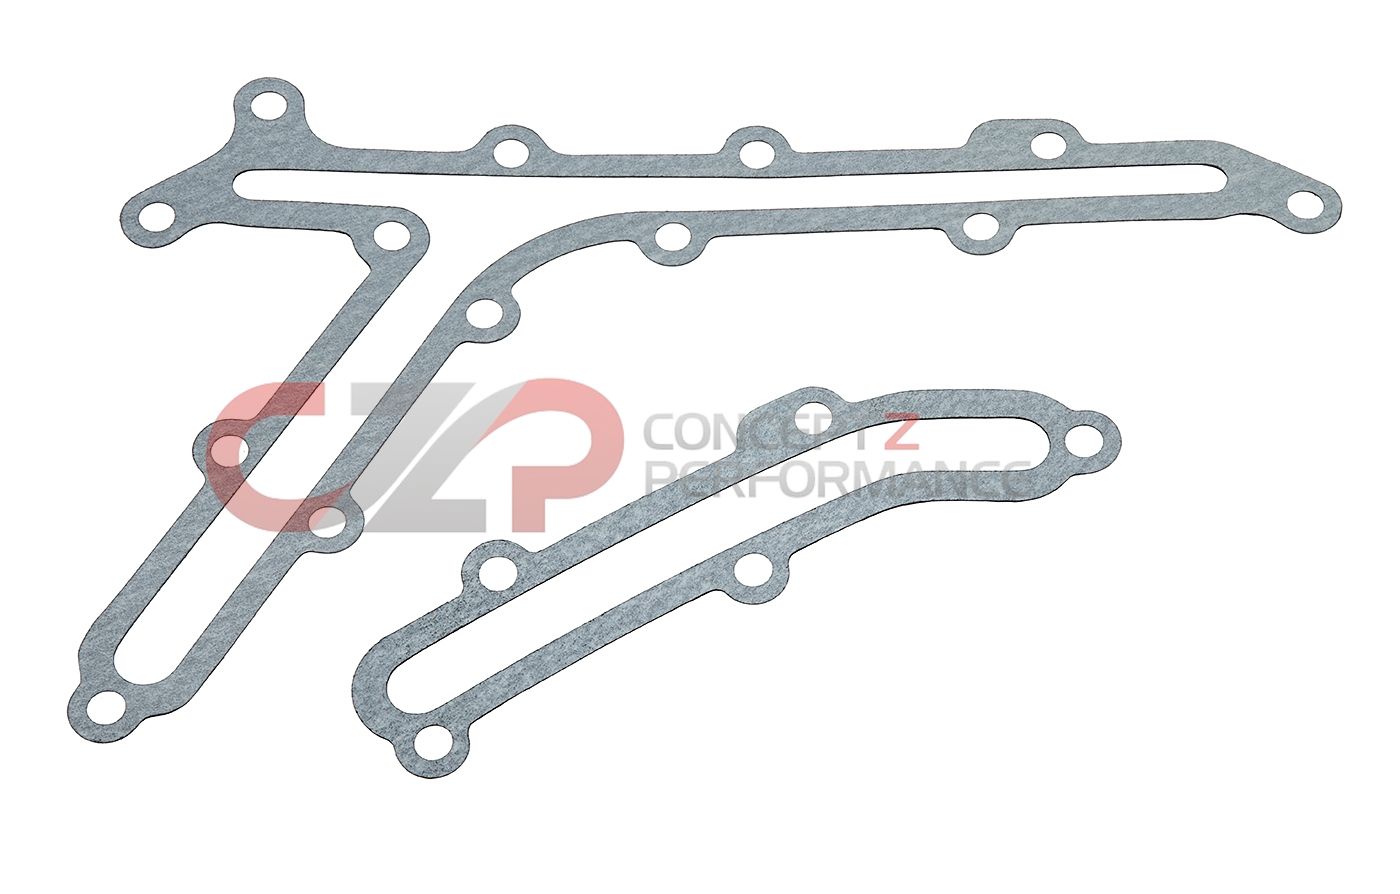 CZP Rear Timing Cover Oil Gallery Gasket Set, VQ35HR VQ37VHR - Nissan 350Z 370Z / Infiniti G35 G37 Q40 Q50 Q60 Q70 M37 FX35 FX37 QX70